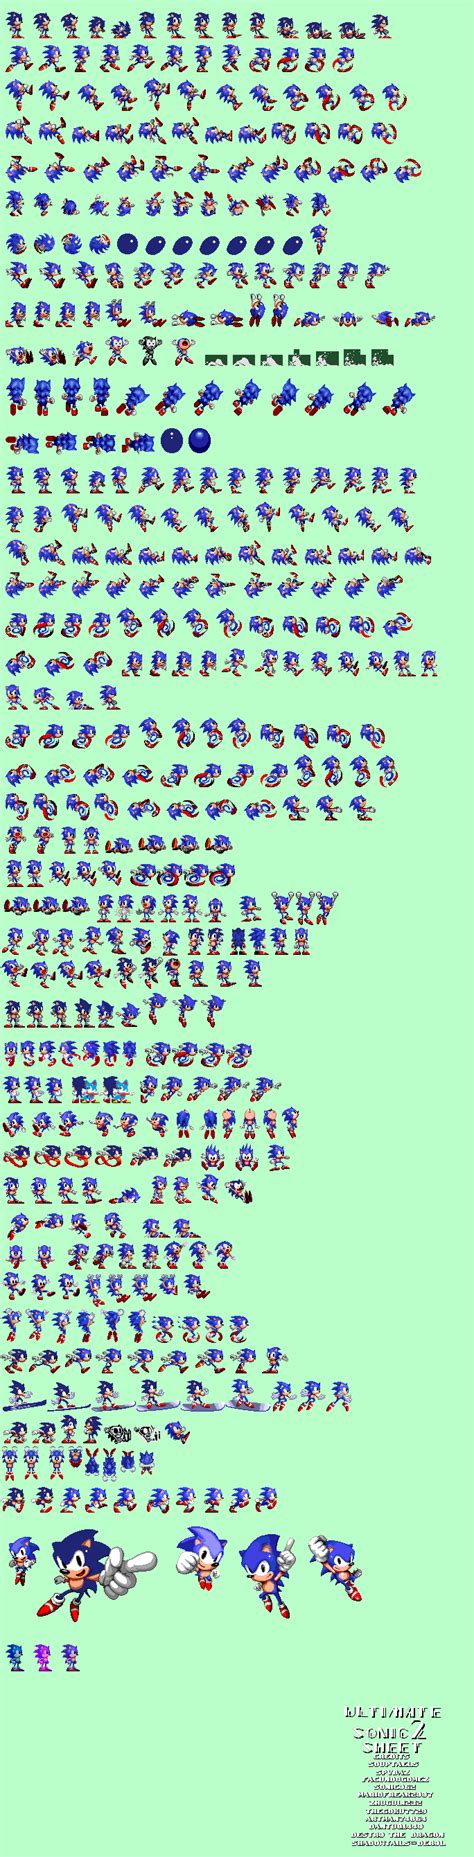 I Would Love To Give Credit To The Guy Who Made This Sprite Sheet